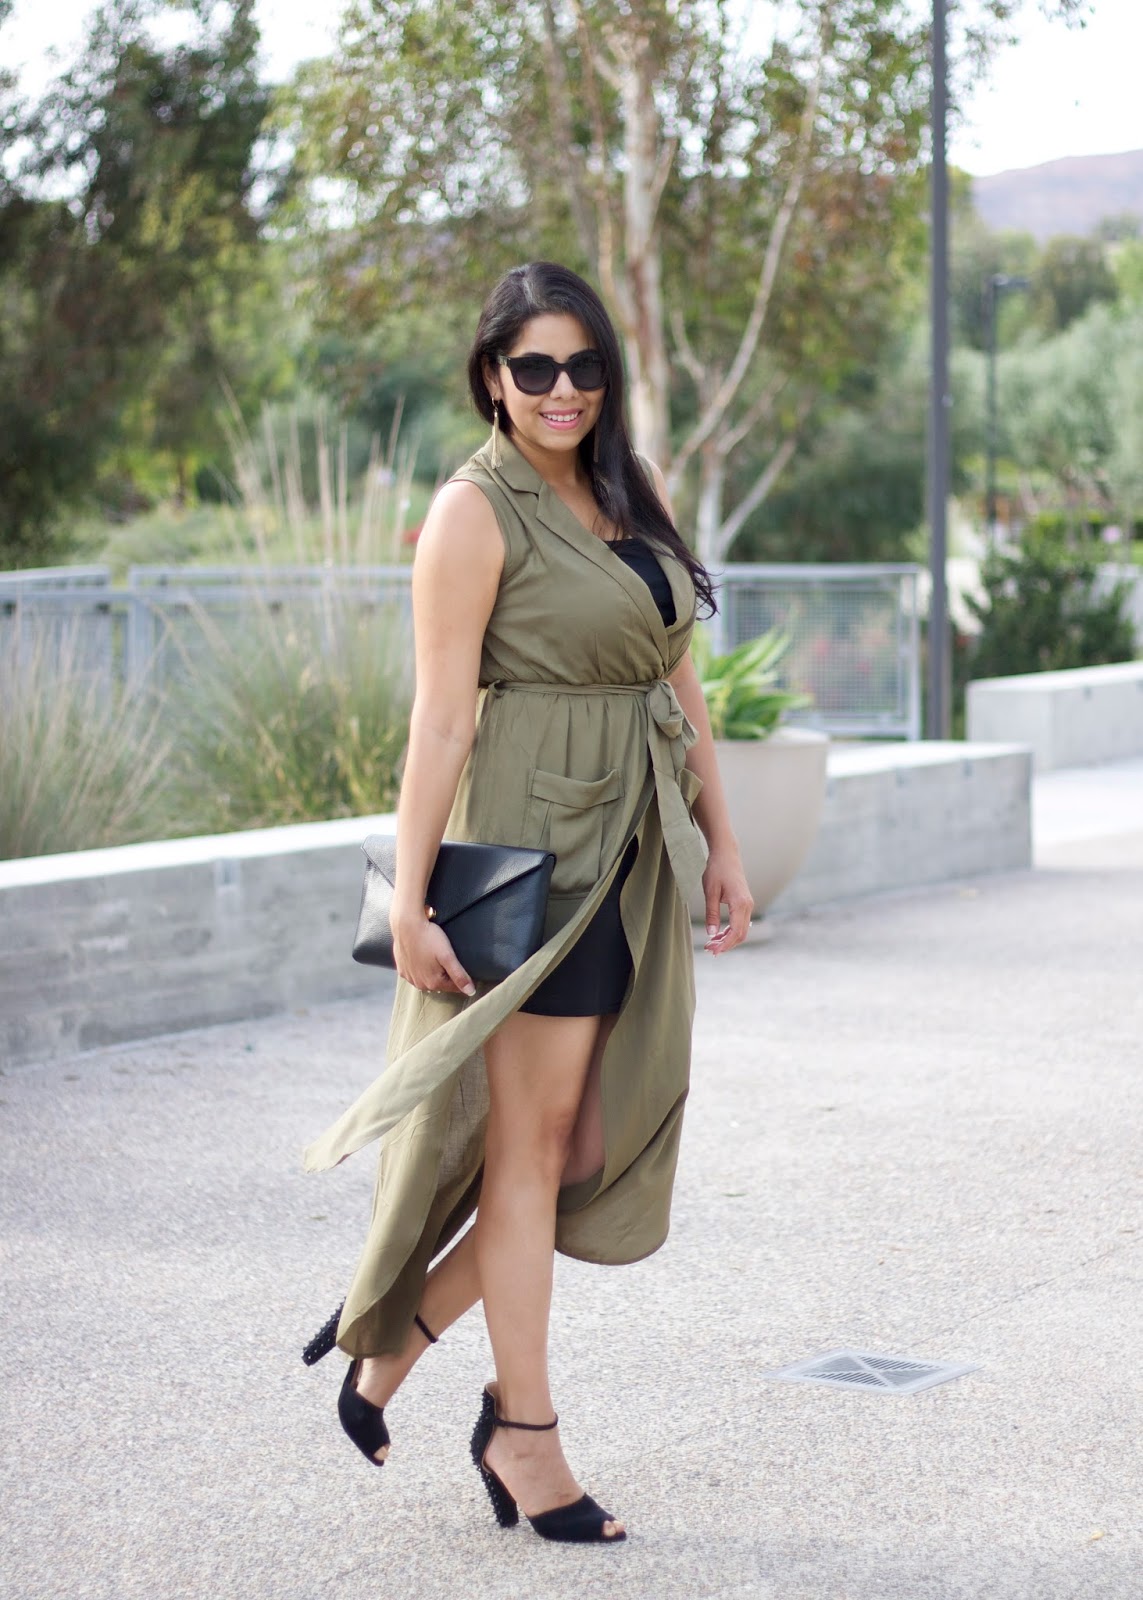 Transitioning in Olive - Lil bits of Chic